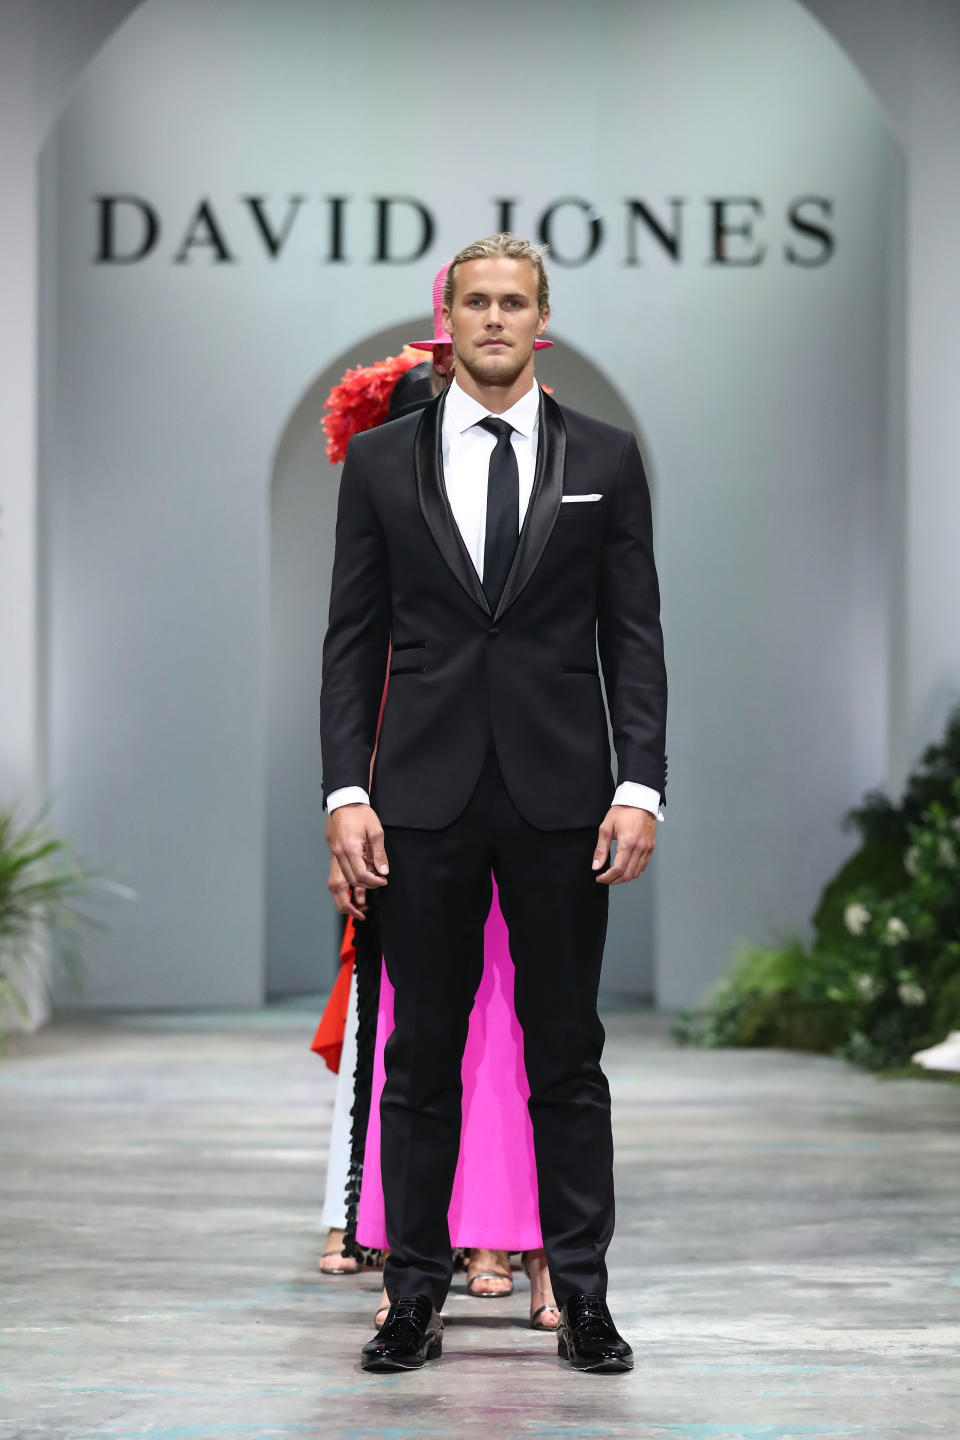 Lisa Curry’s son, Jett Kenny, has taken to the catwalk to strut his stuff for the David Jones spring/summer 2018 collection launch. Photo: Getty Images